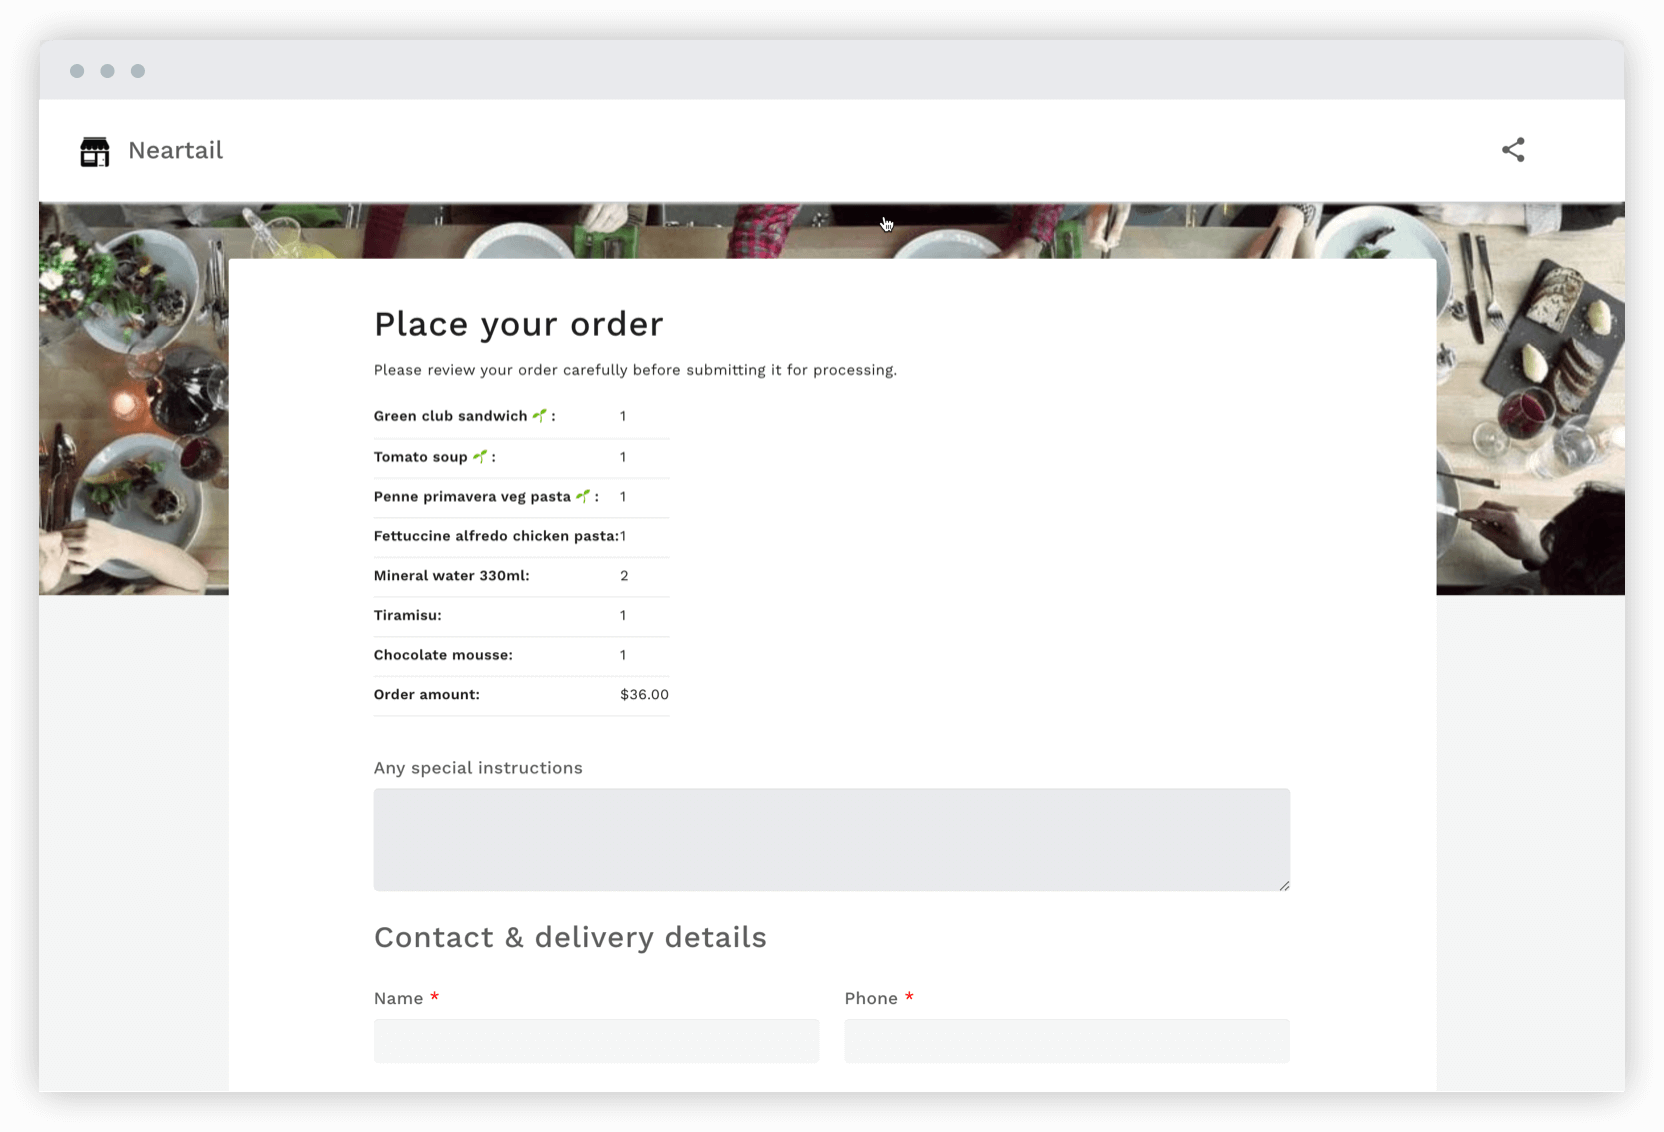 Show an order summary & make it easy for your users to review their order before they submit their order